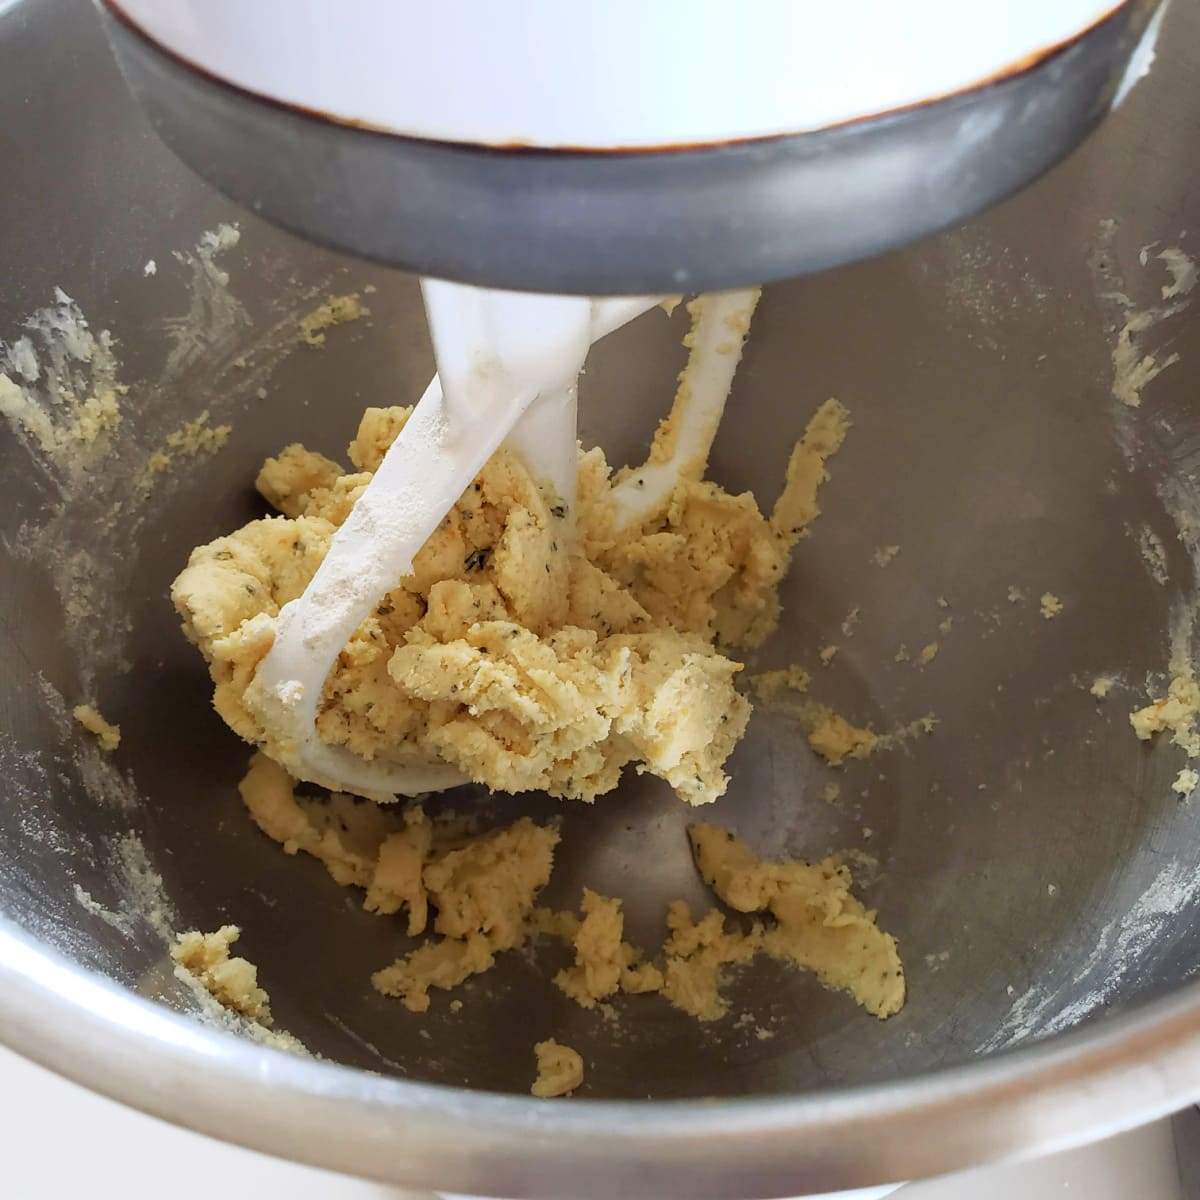 Cookie dough clumps around the white paddle in silver mixing bowl